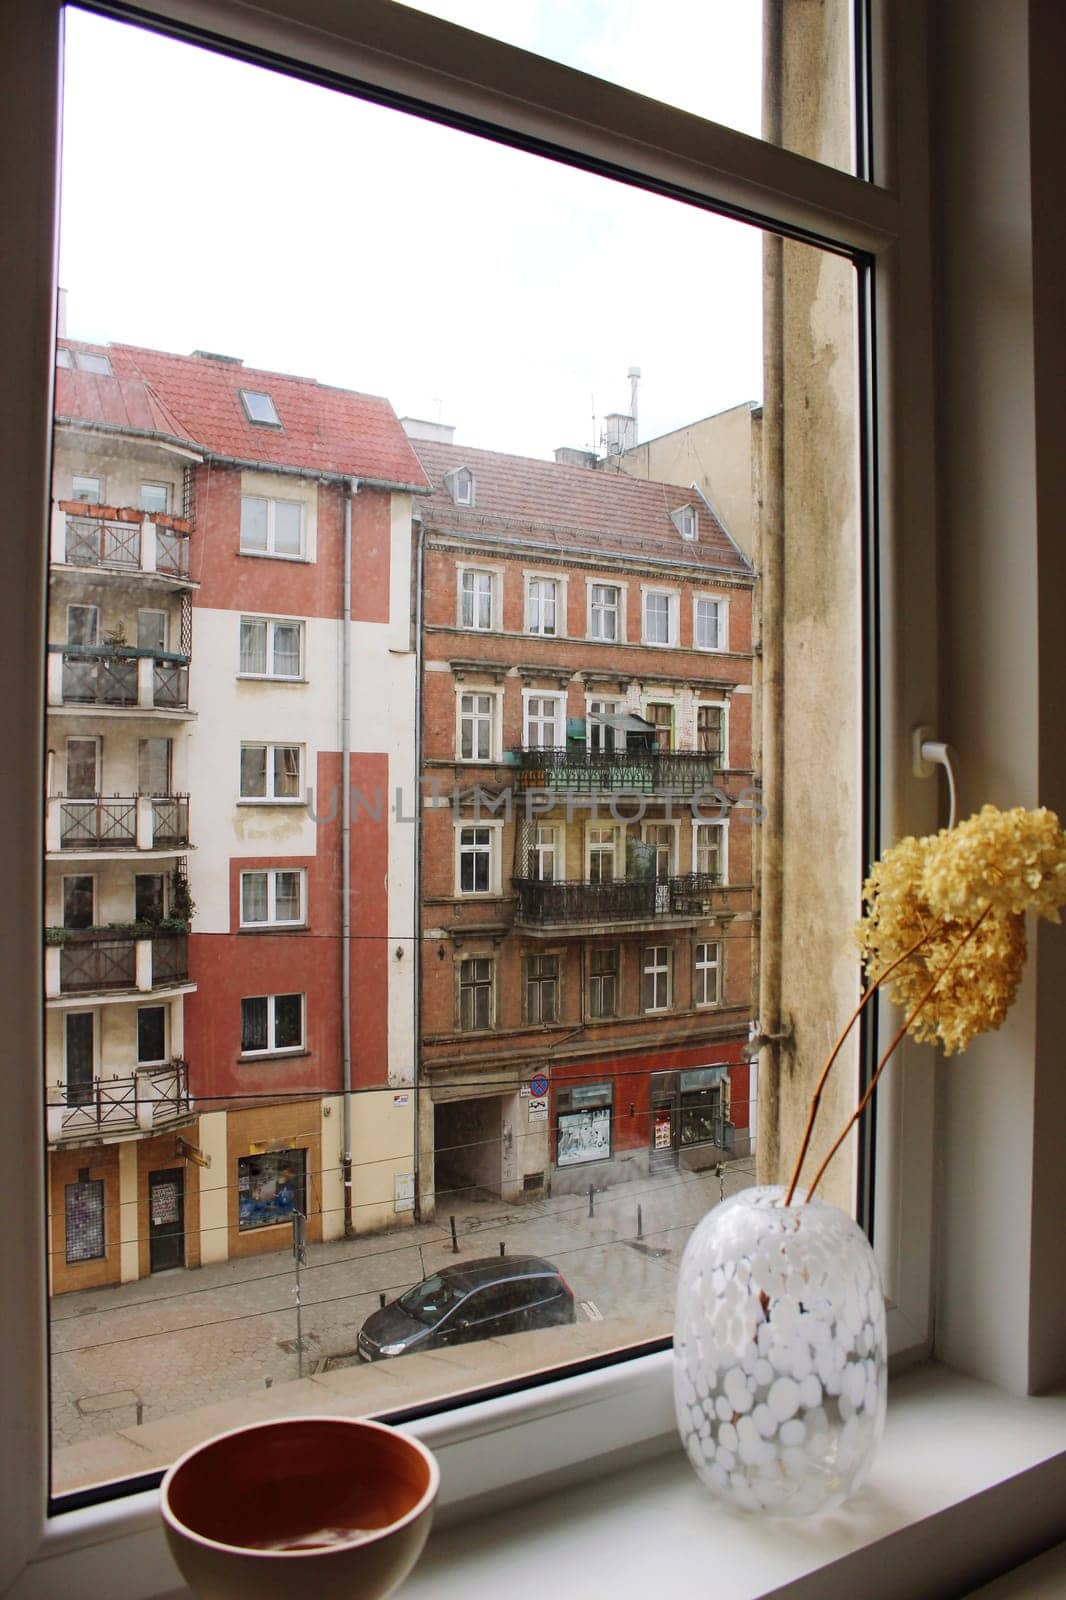 View from the window to the street with a colorful old house. High quality photo